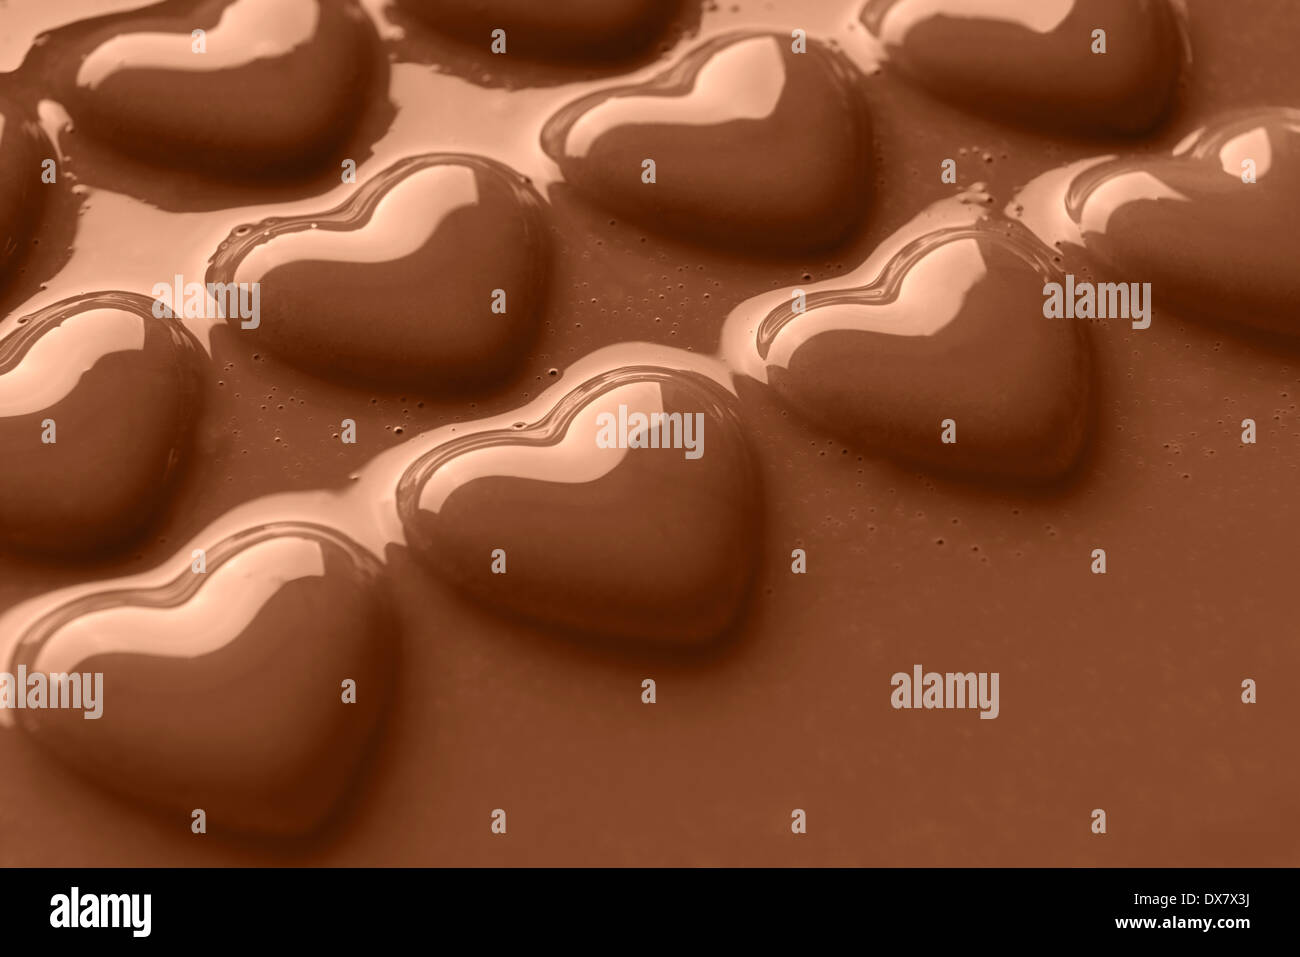 Photo of chocolate hearts covered in creamy milk chocolate shot at an angle with copy space for your own message. Stock Photo